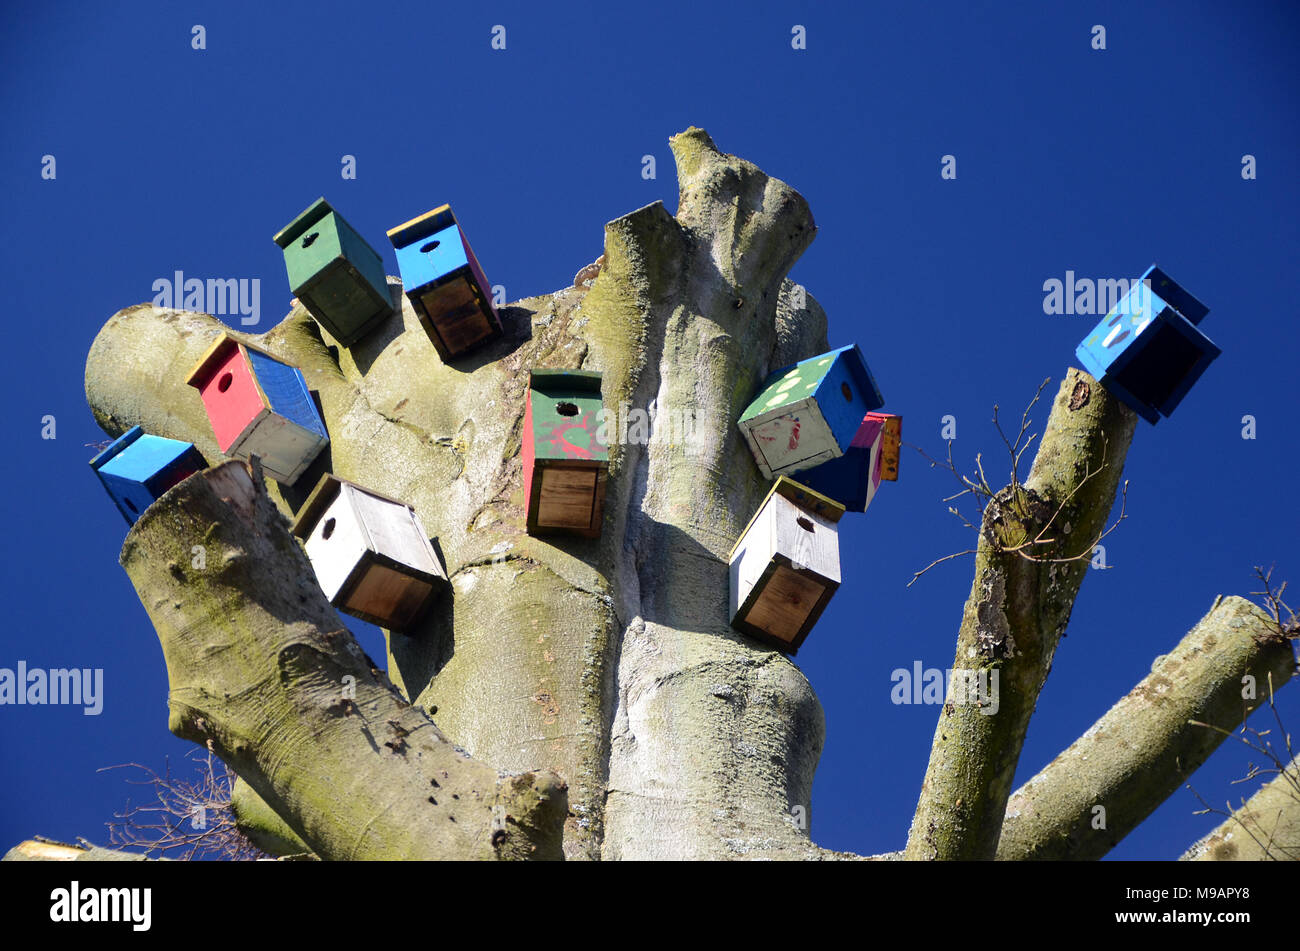 A dead tree has been cropped and equipped with colorful nest boxes.. Stock Photo